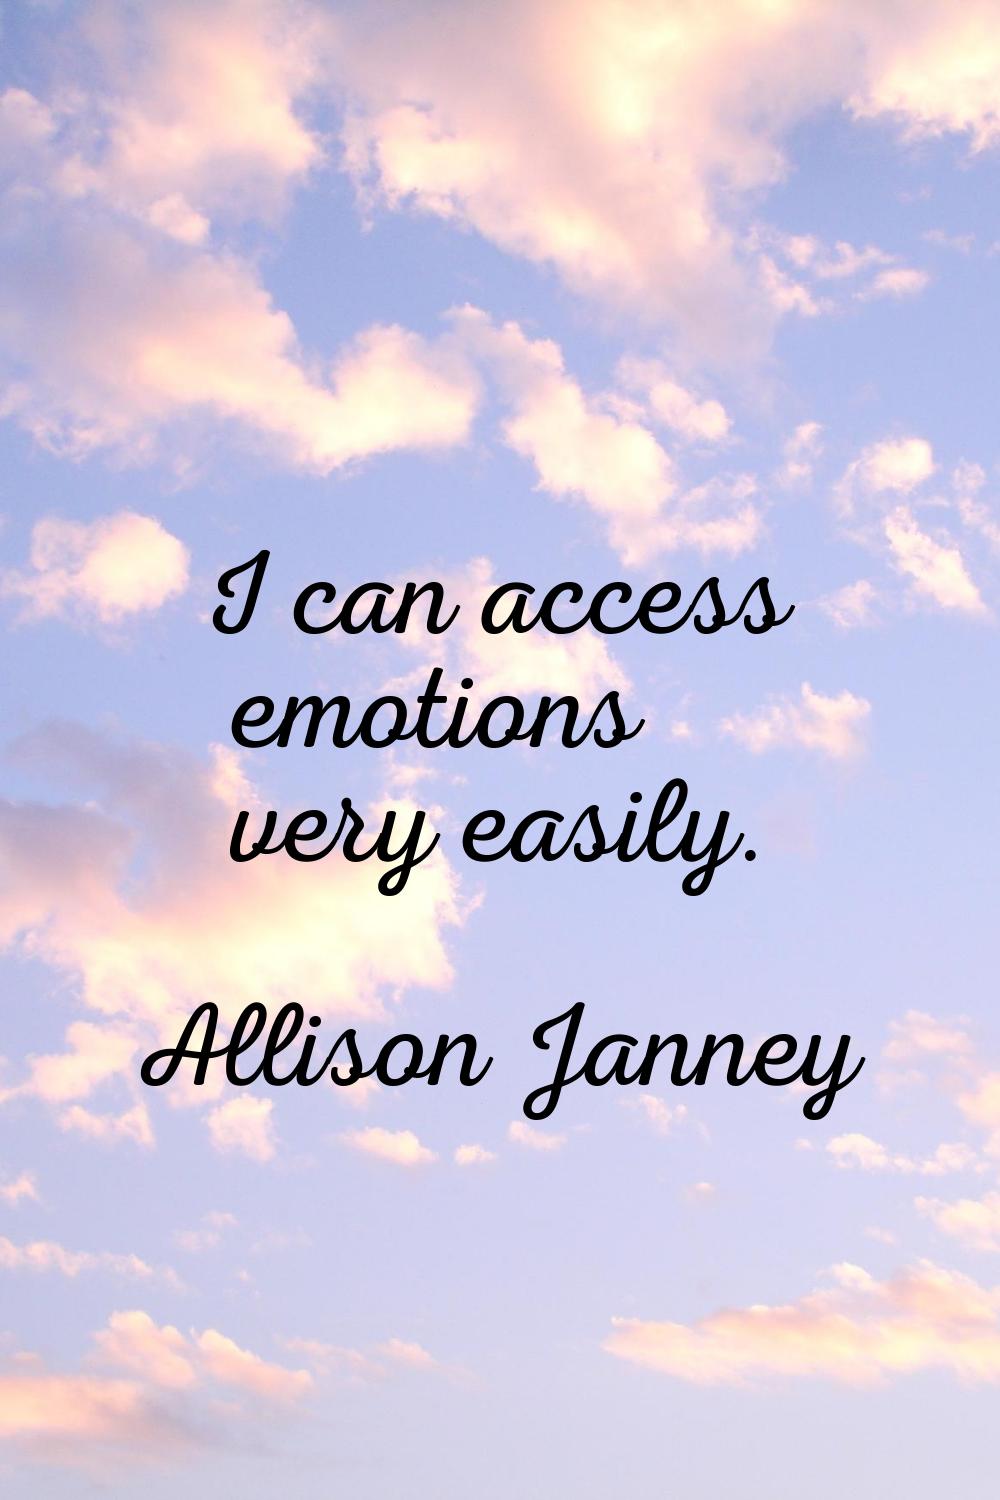 I can access emotions very easily.